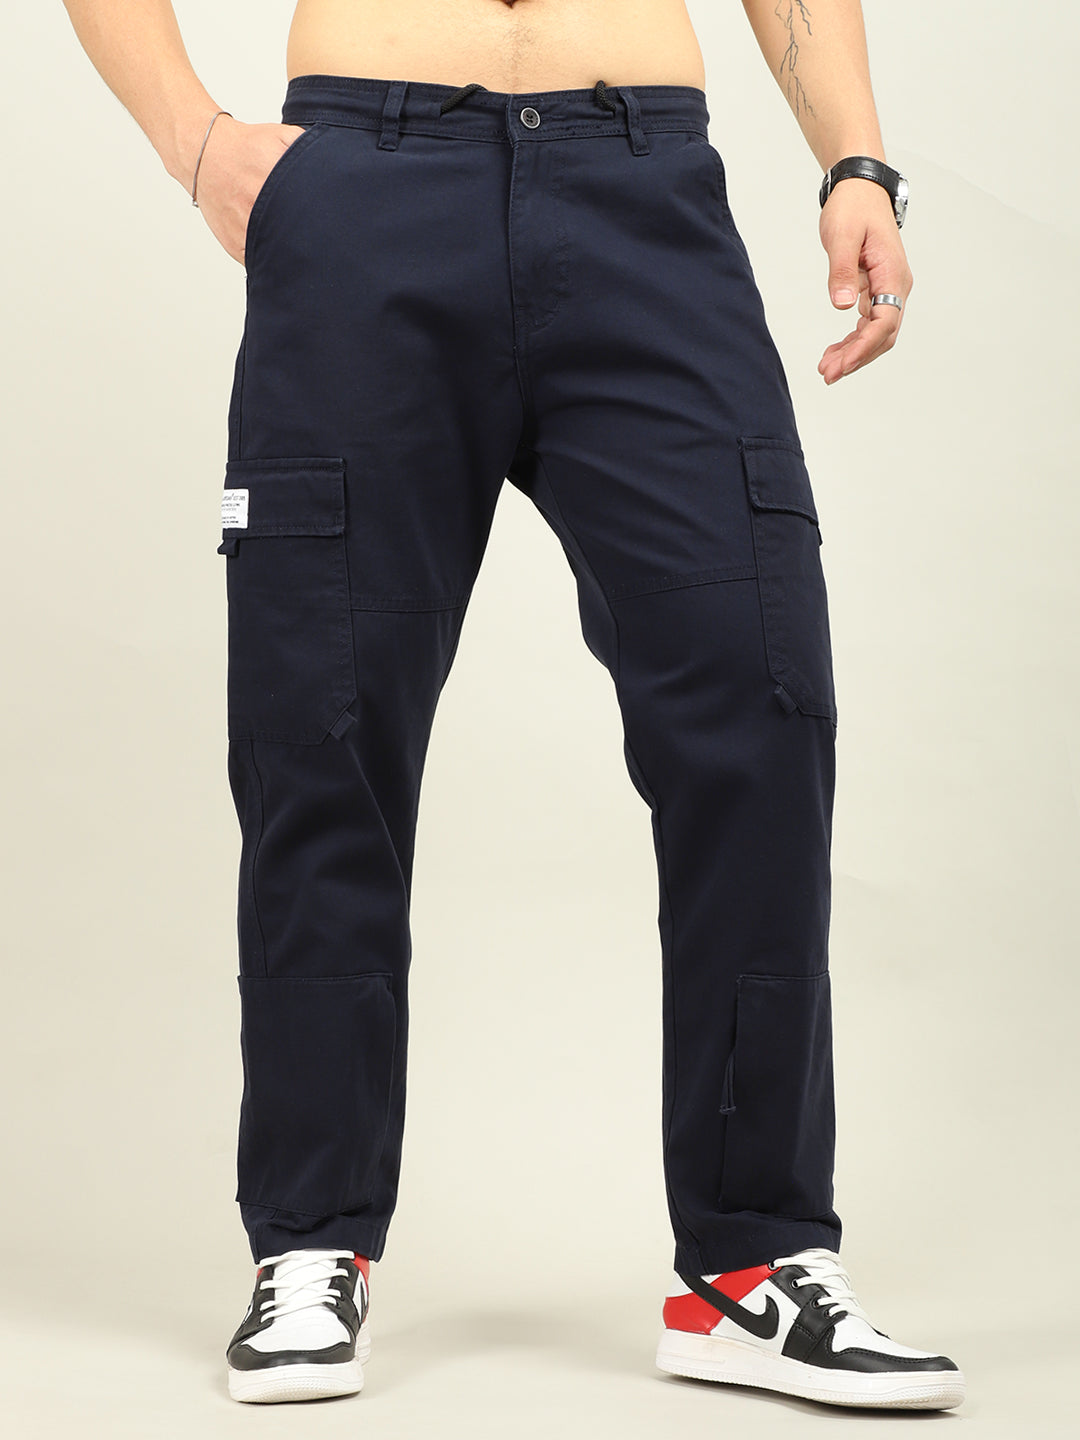 Drone Fantacy Navy Baggy Fit Cotton Cargo